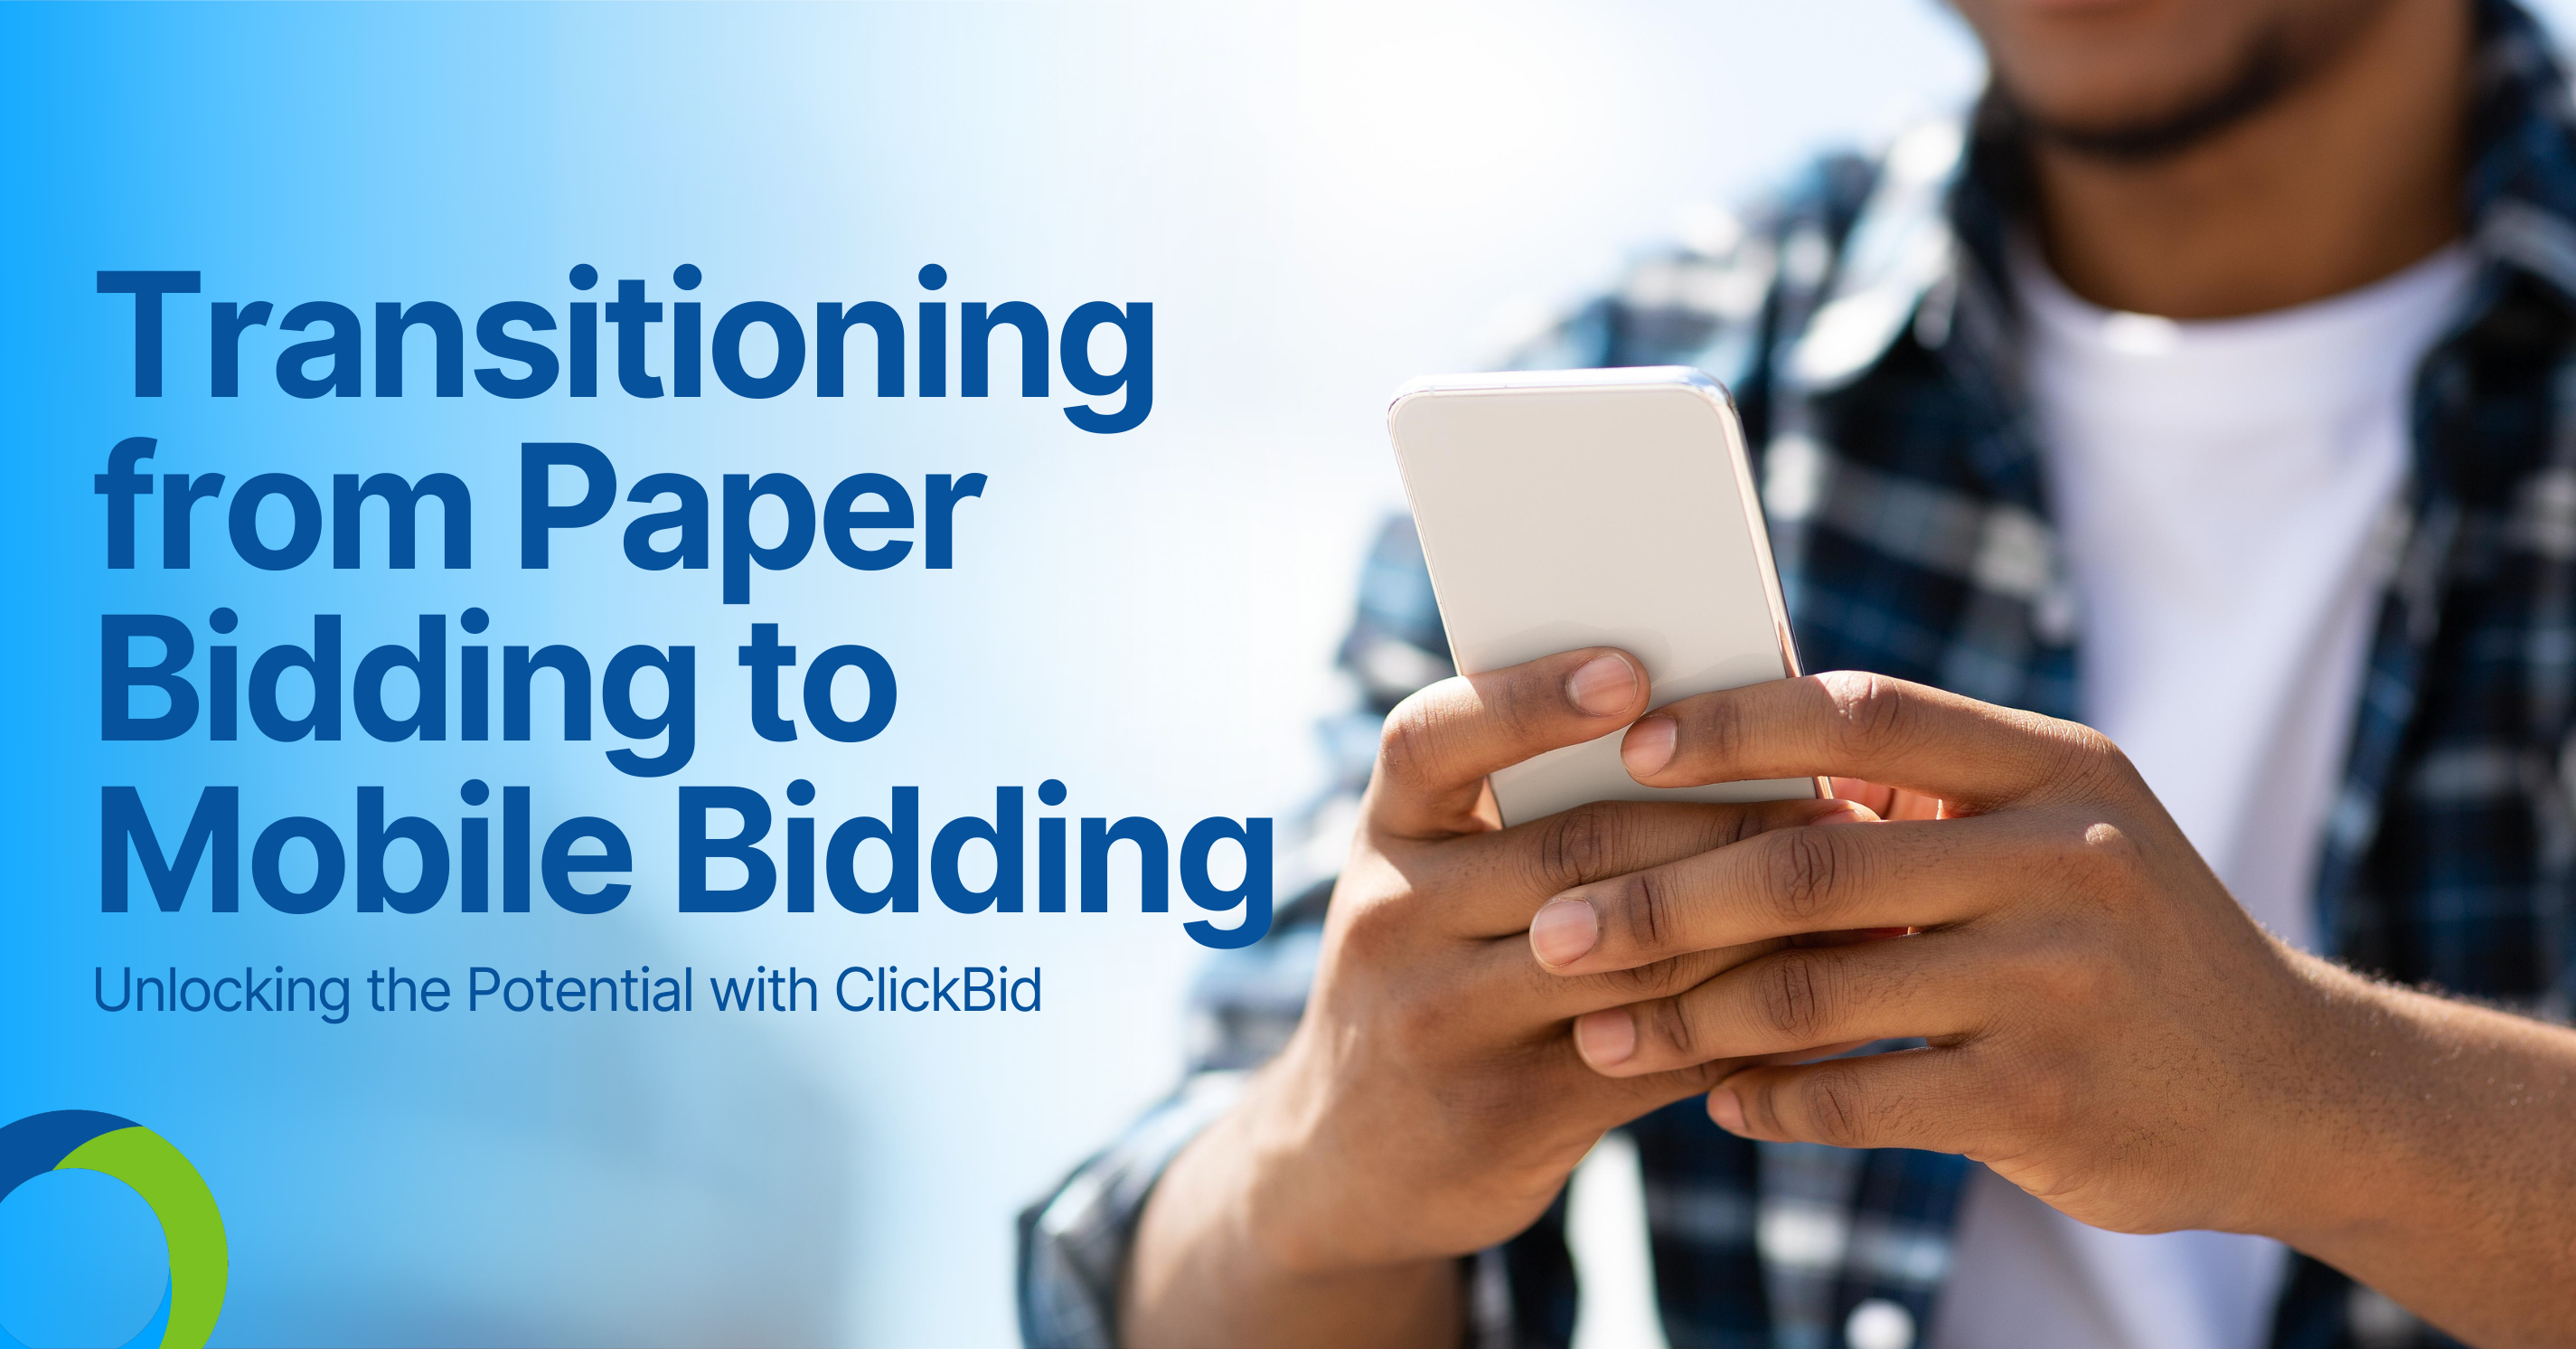 Transitioning from Paper Bidding to Mobile Bidding: Unlocking the Potential with ClickBid